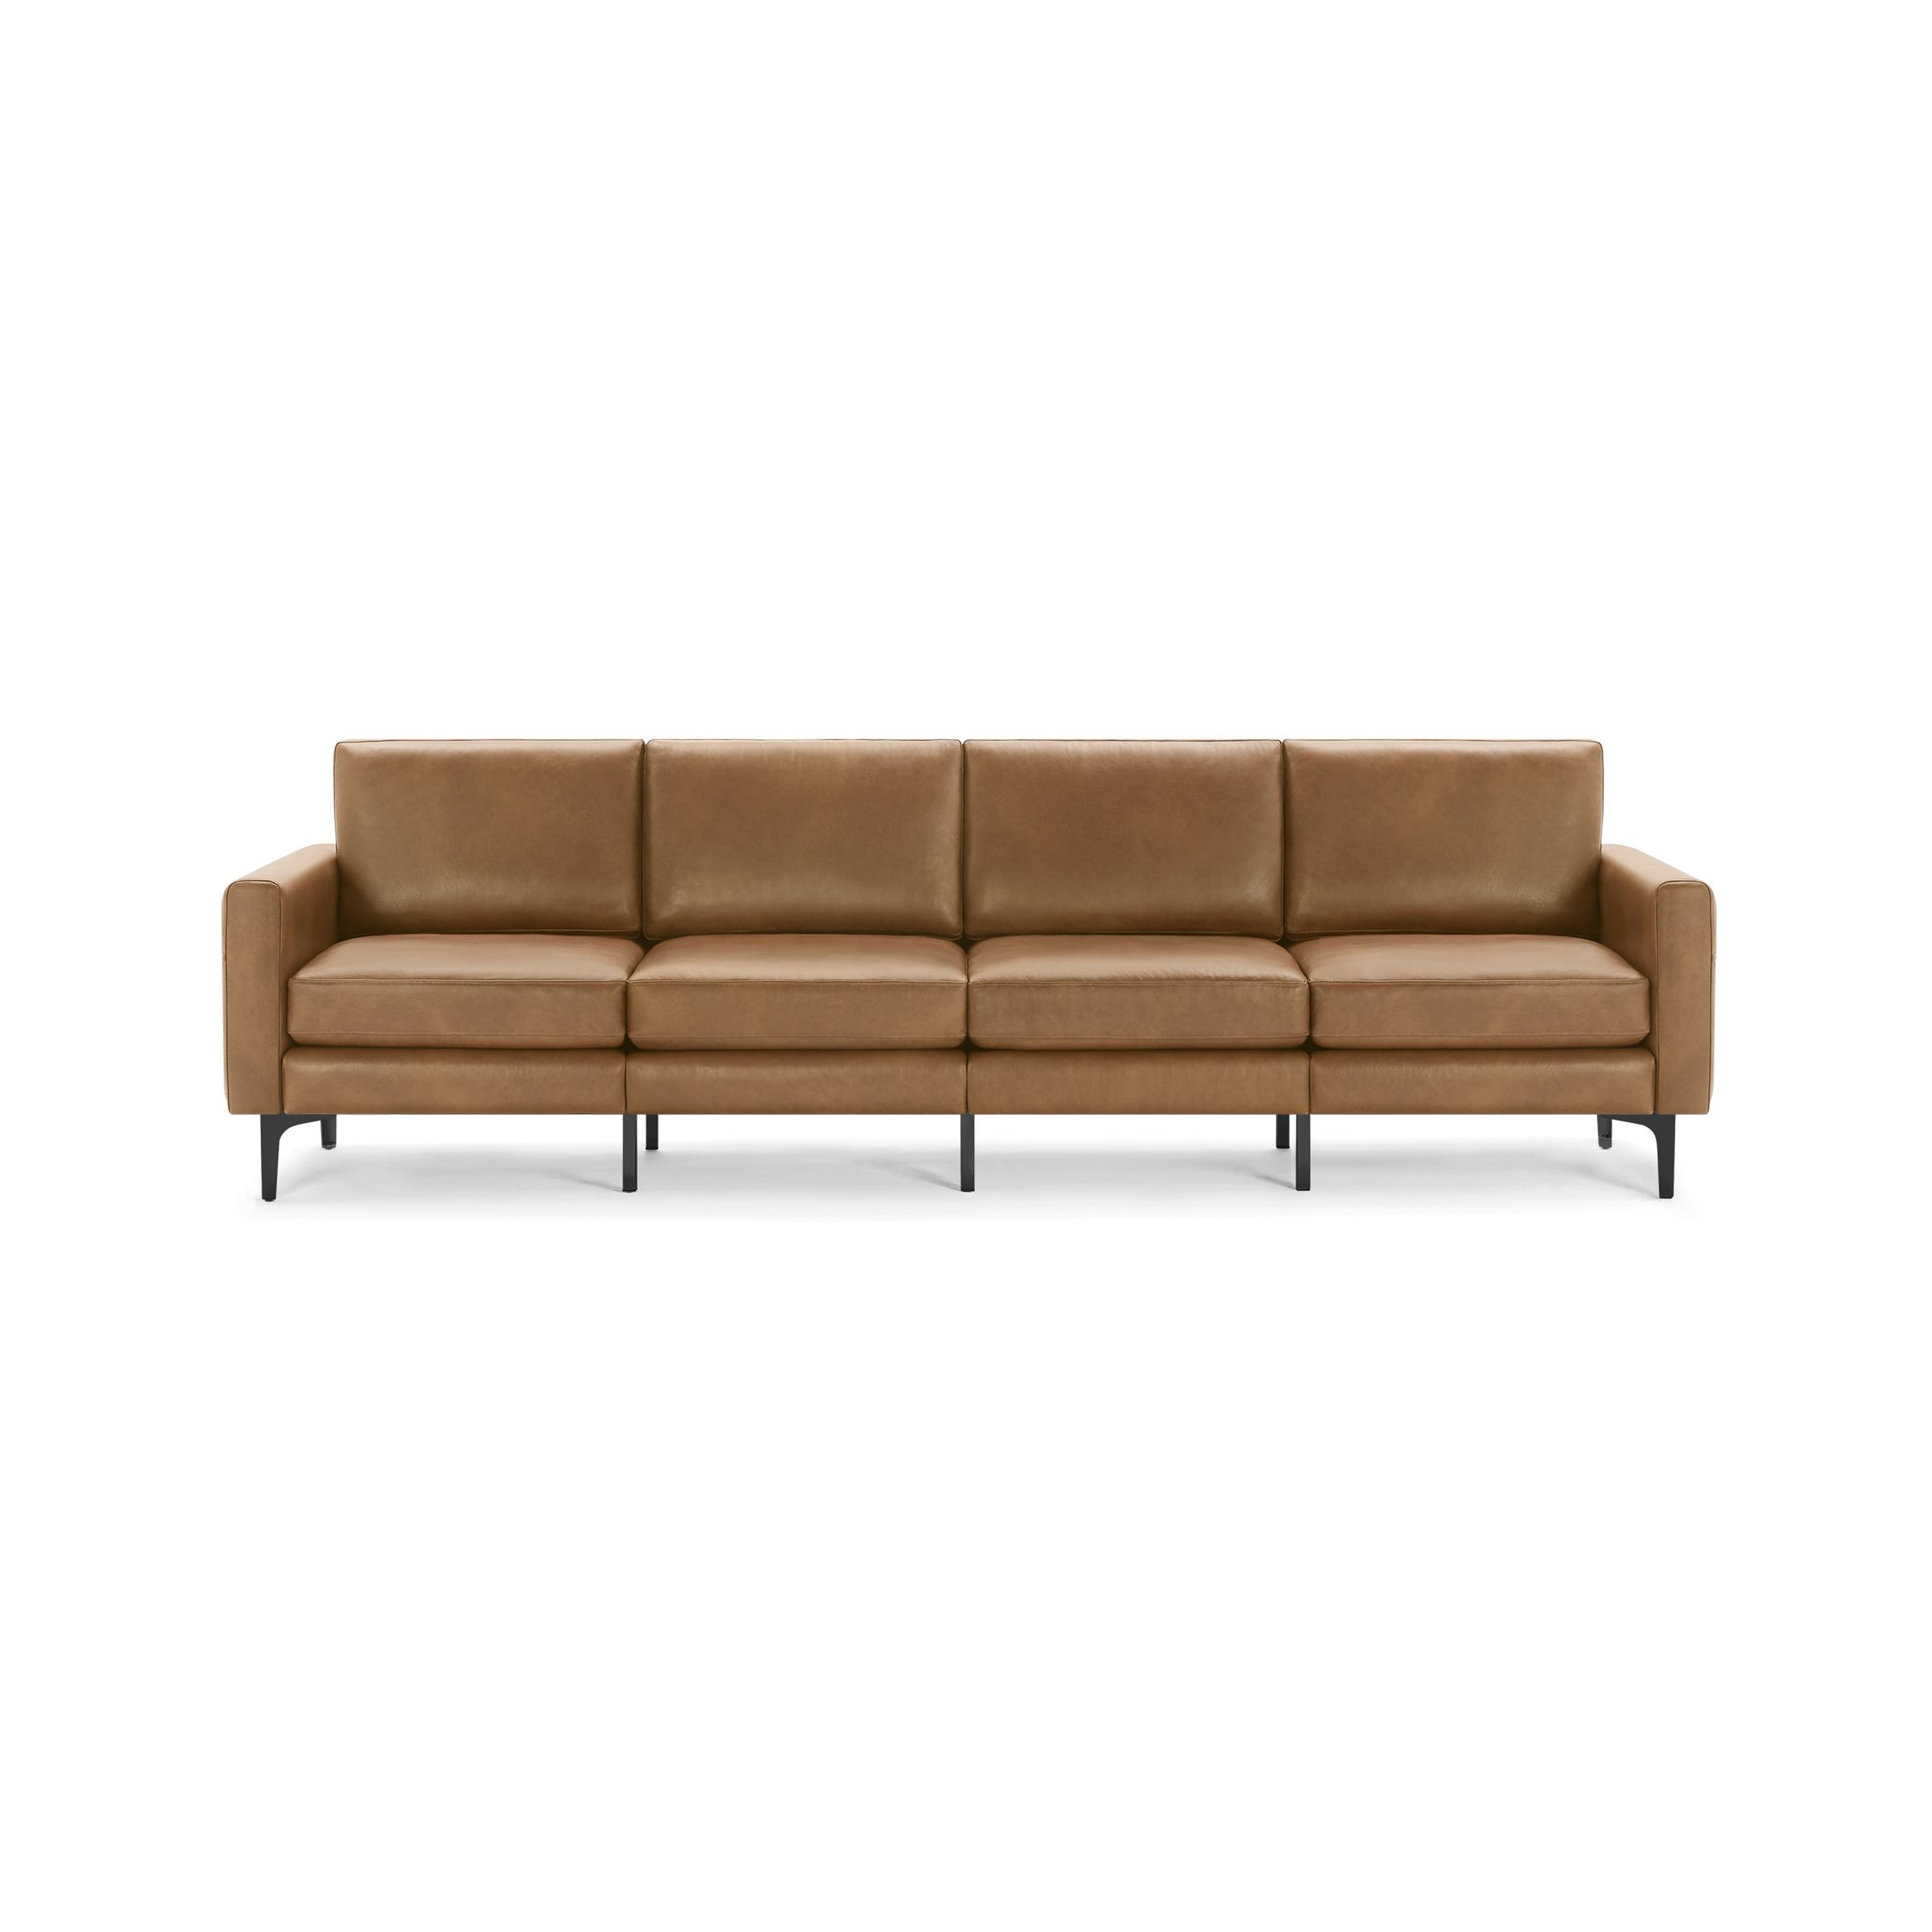 Nomad Leather King Sofa in Camel, Black Metal Legs - Burrow